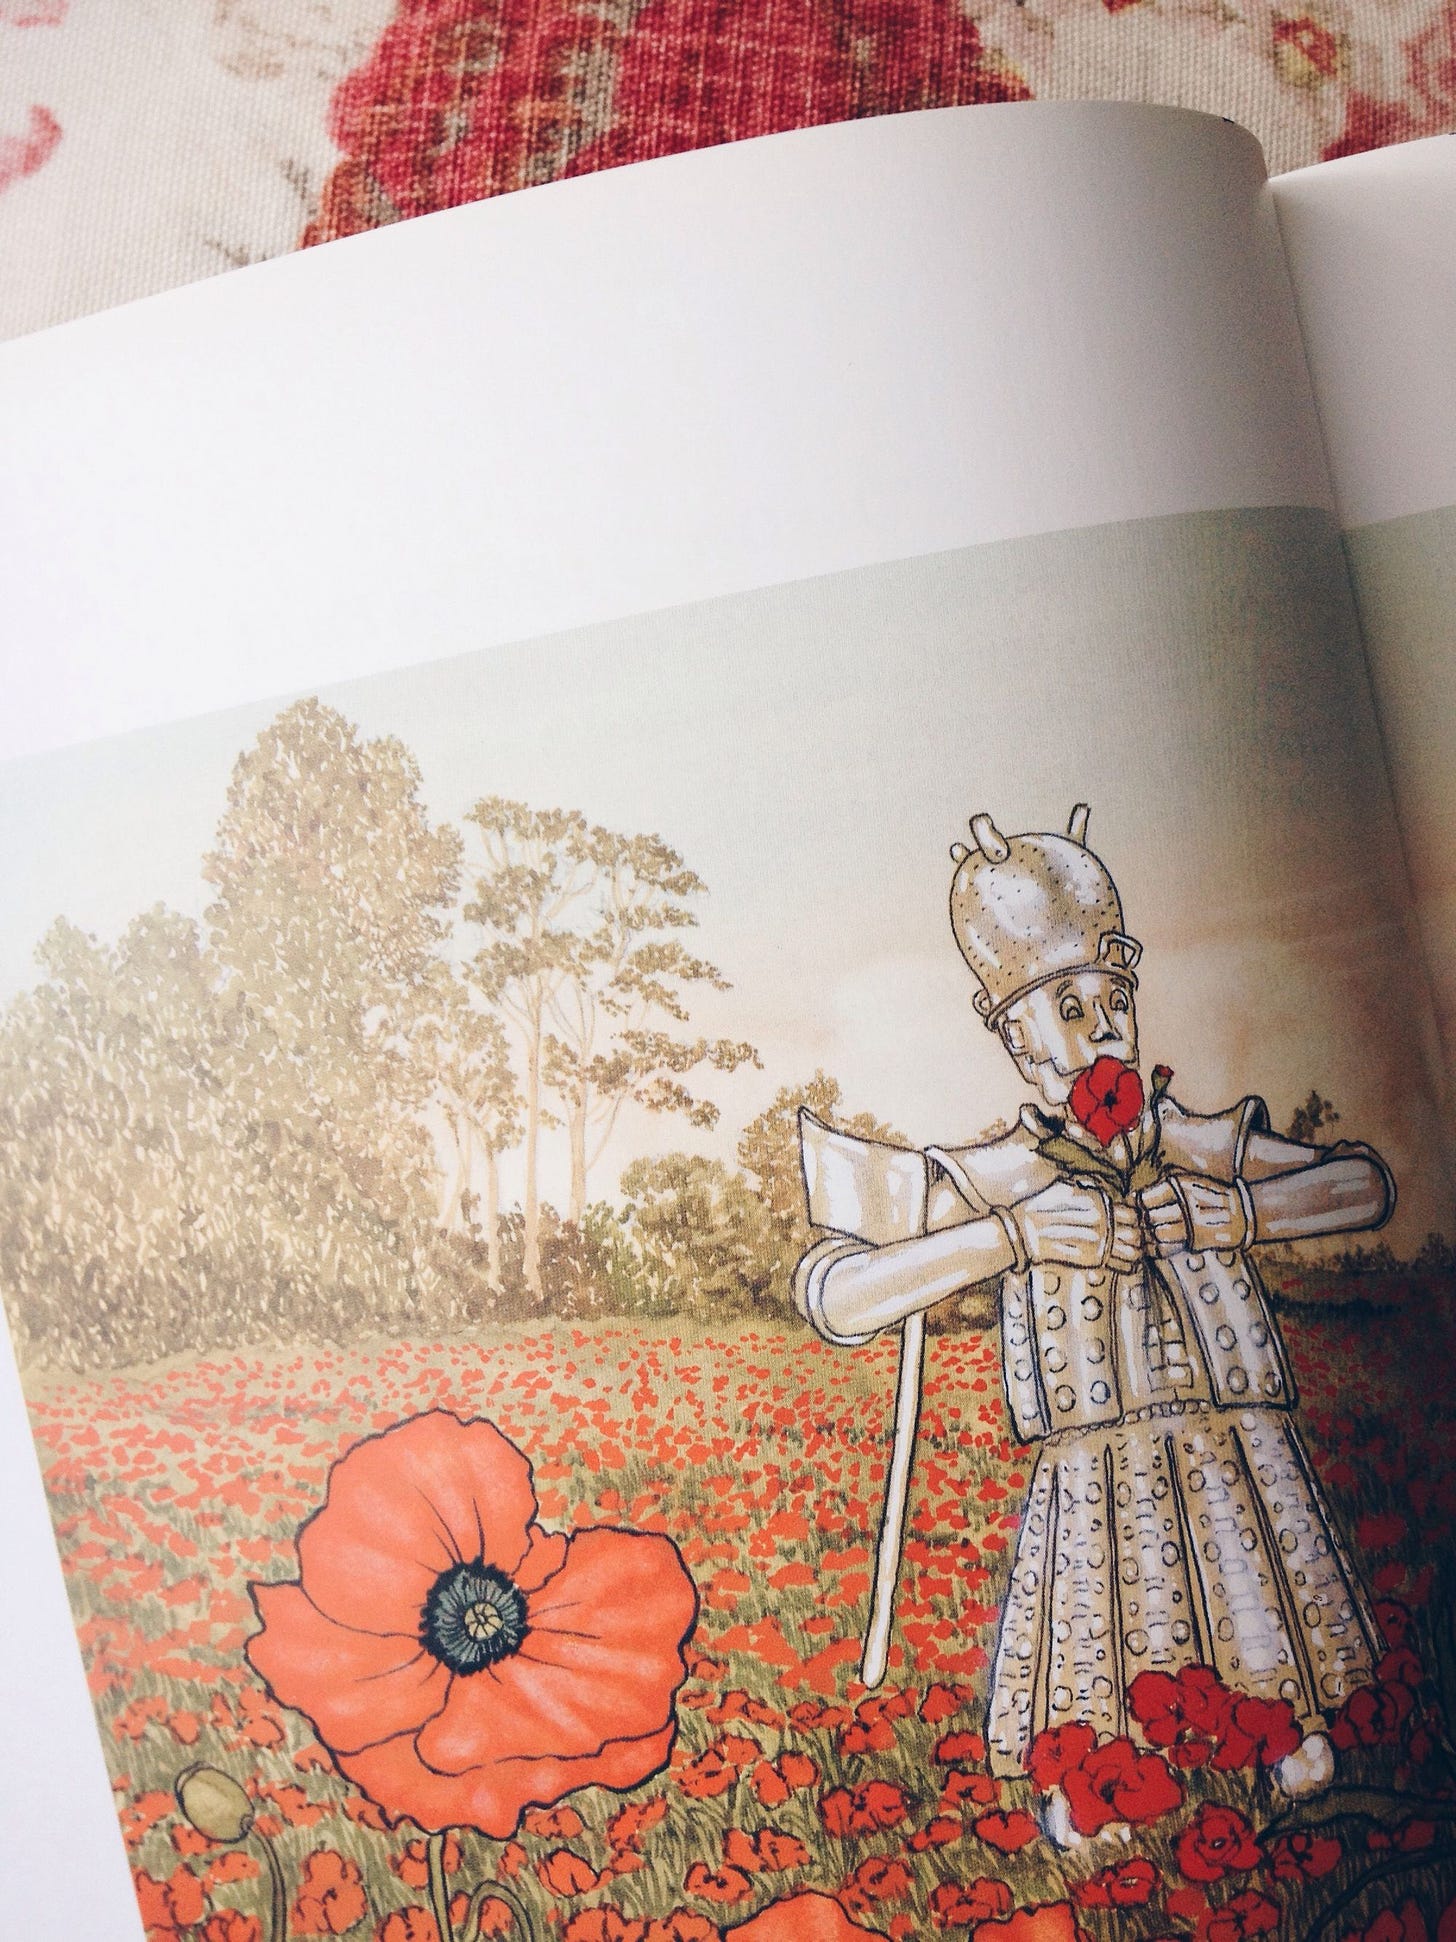 Illustration of the Tin Man from The Wizard of Oz holding red poppies, standing in a field of poppies.